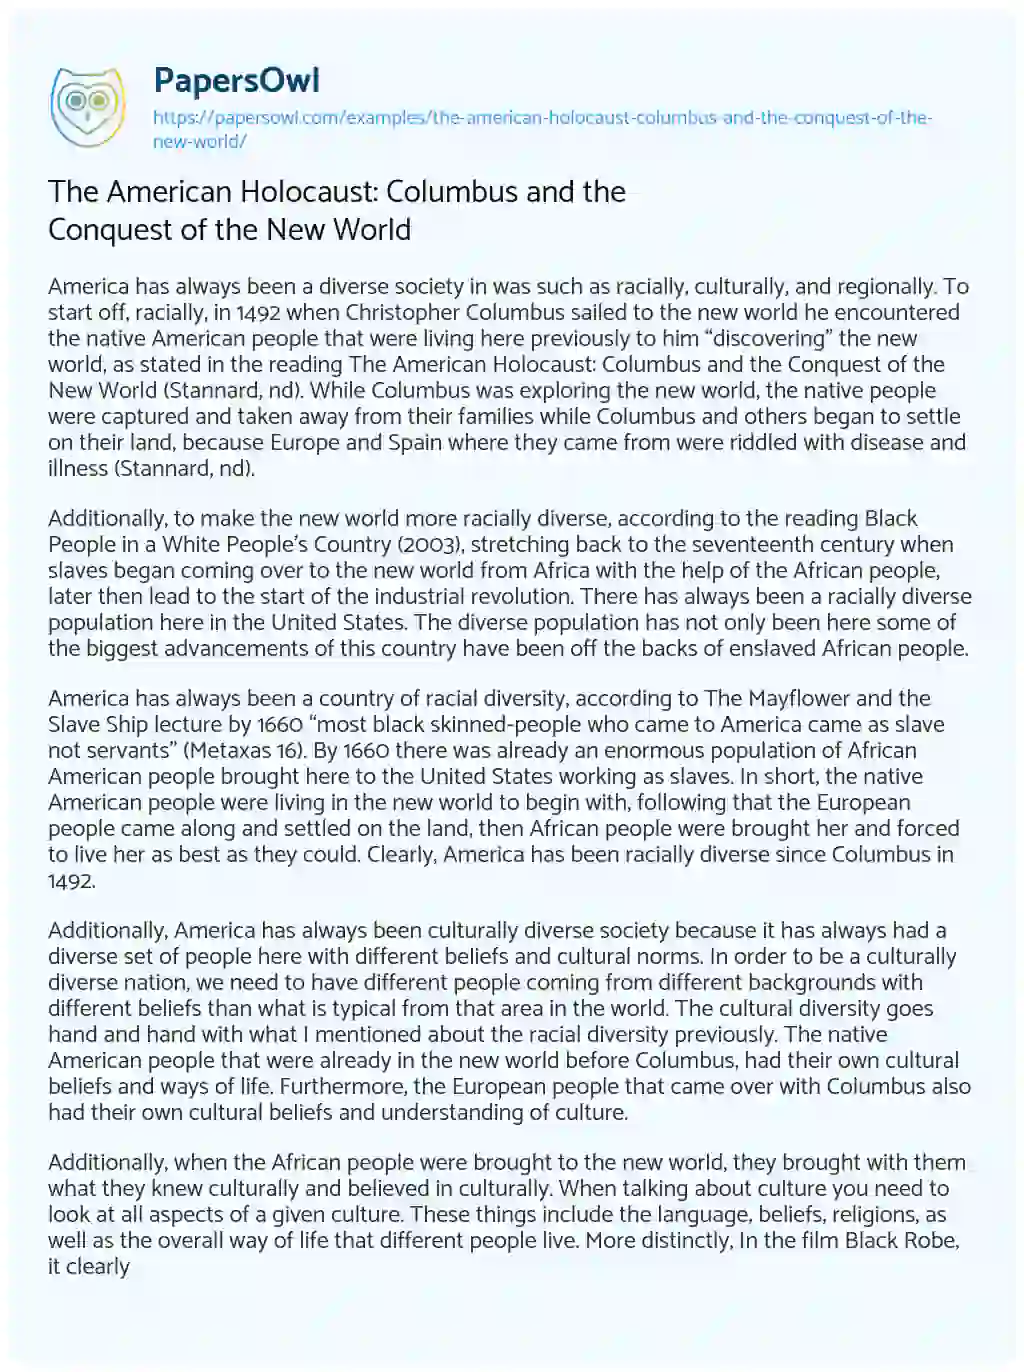 The American Holocaust: Columbus and the Conquest of the New World essay